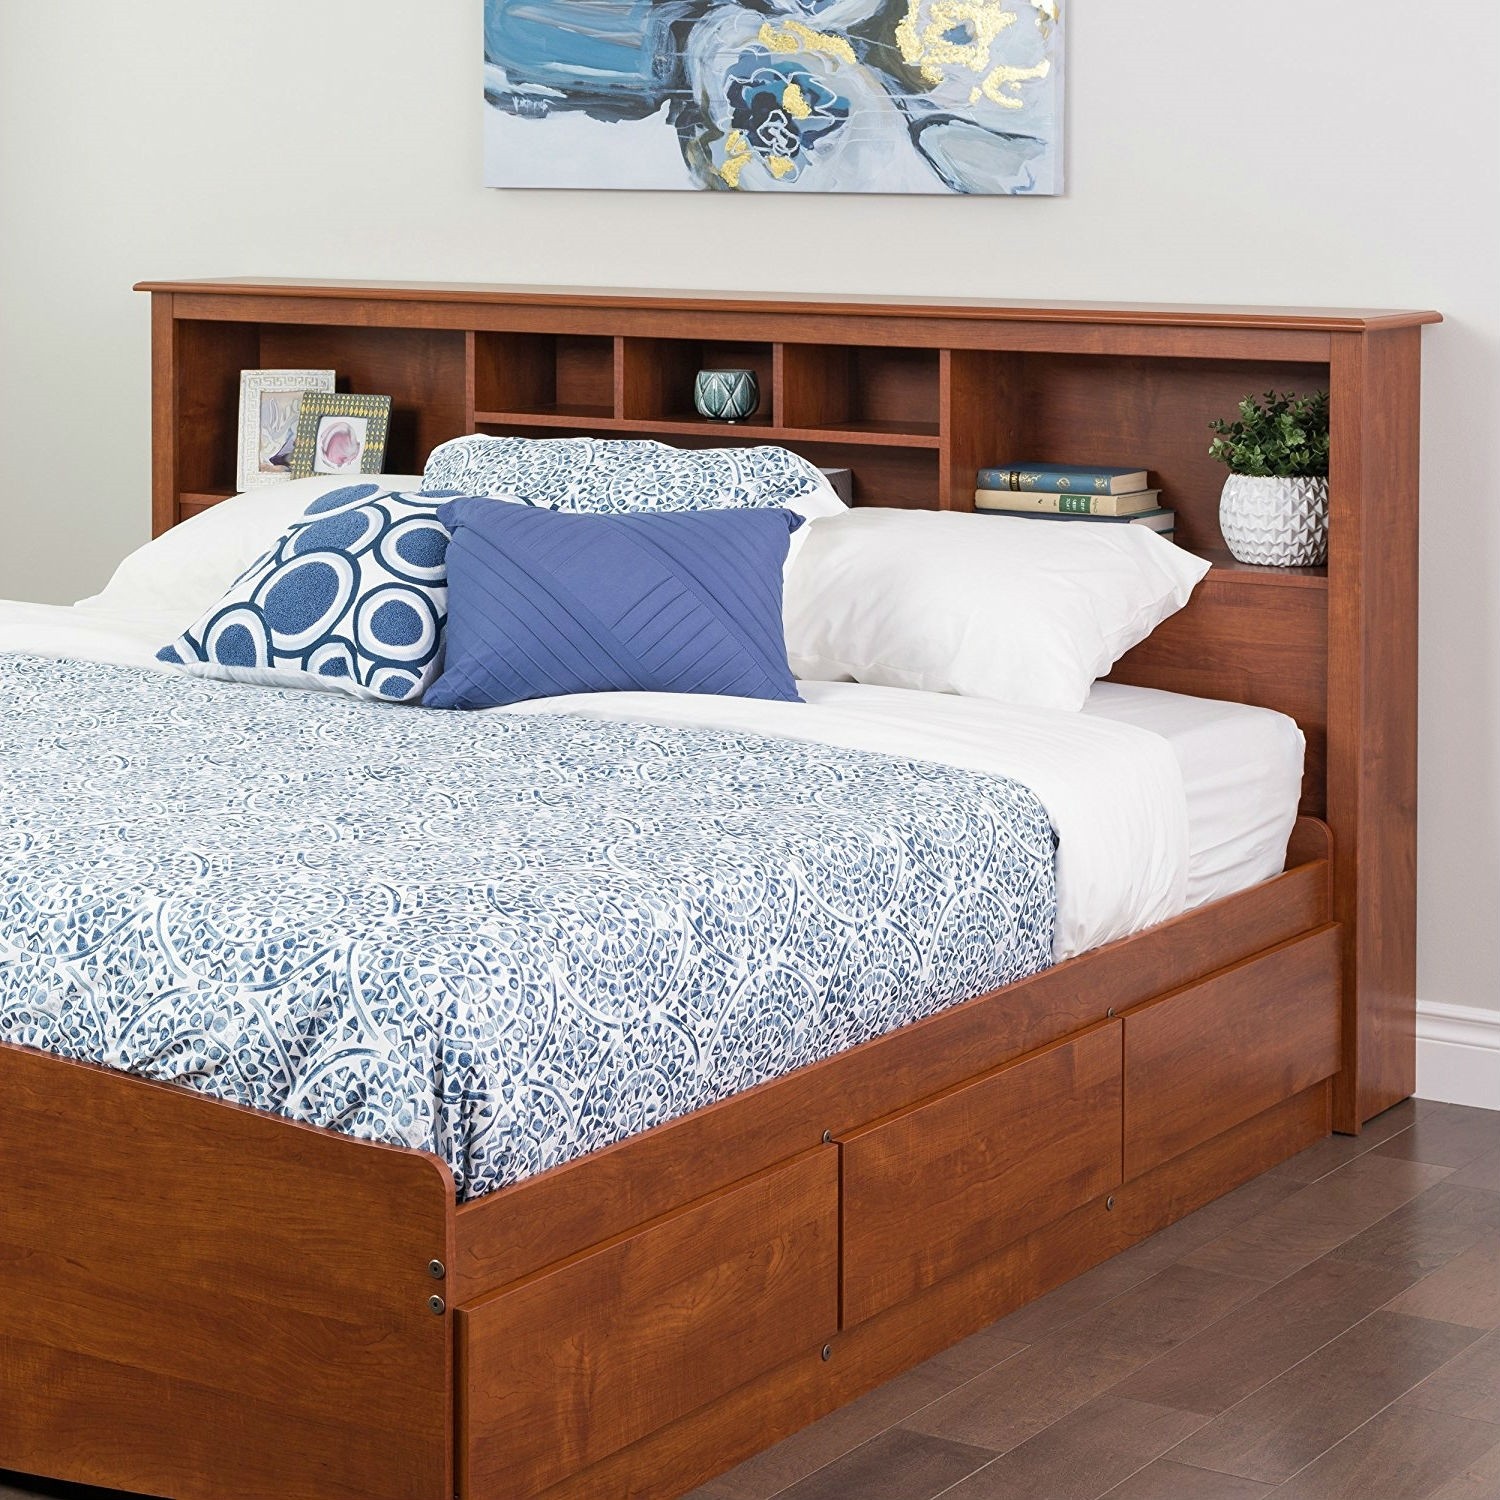 King Size Bookcase Headboard With Adjustable Shelf In 